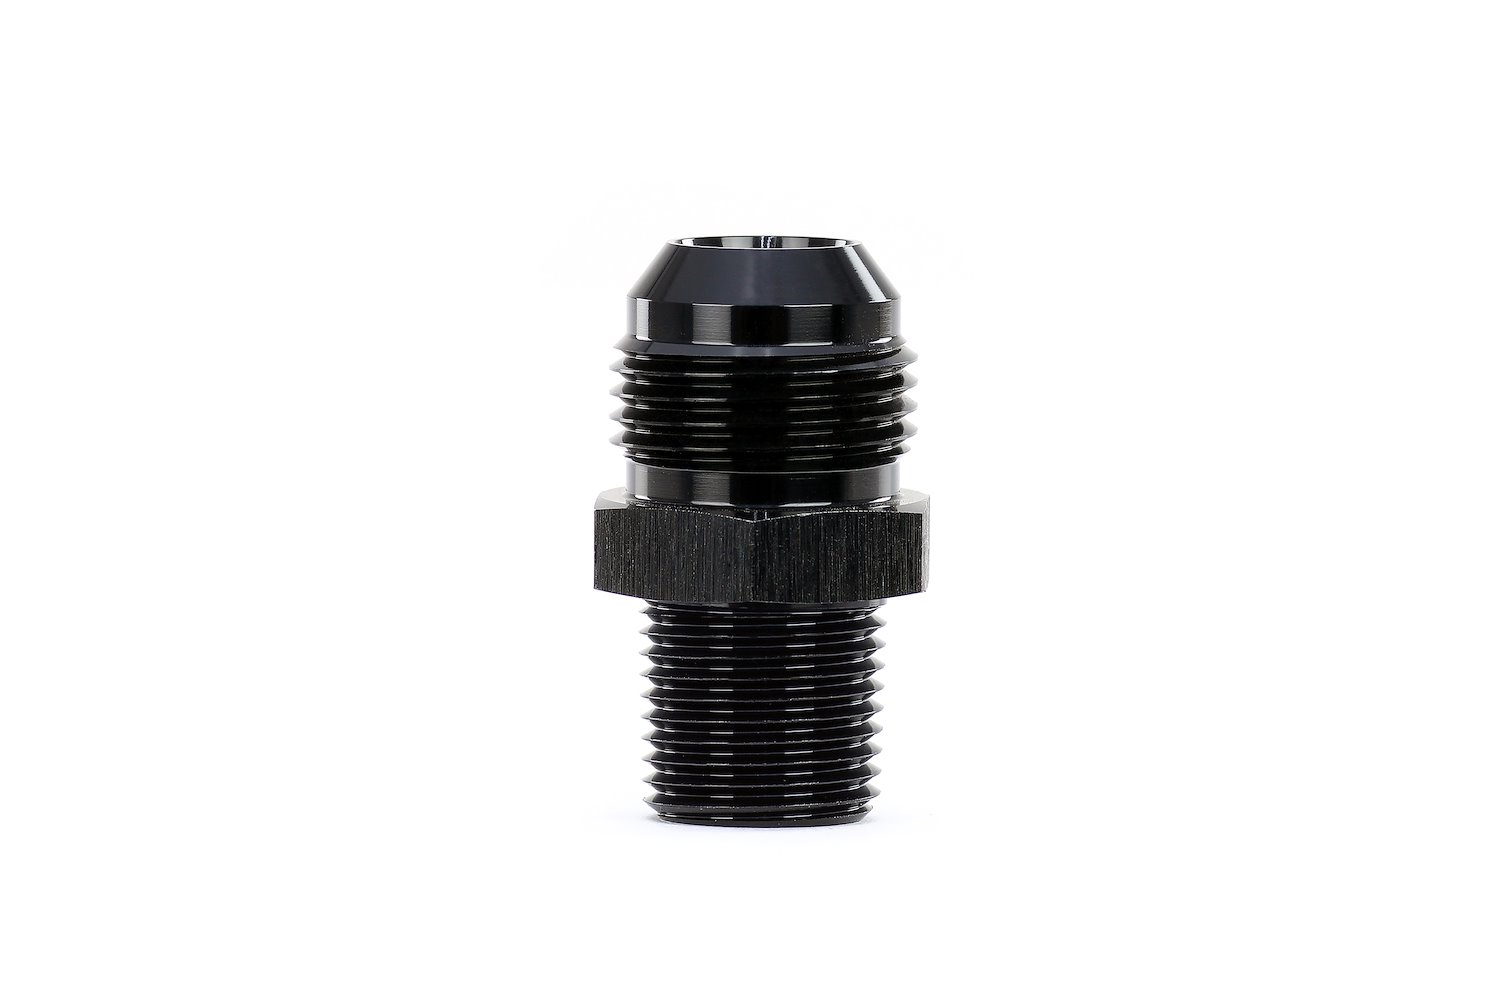 AN81610 AN Flare to NPT Straight Adapter, Convert from NPT Pipe Thread To An Flare